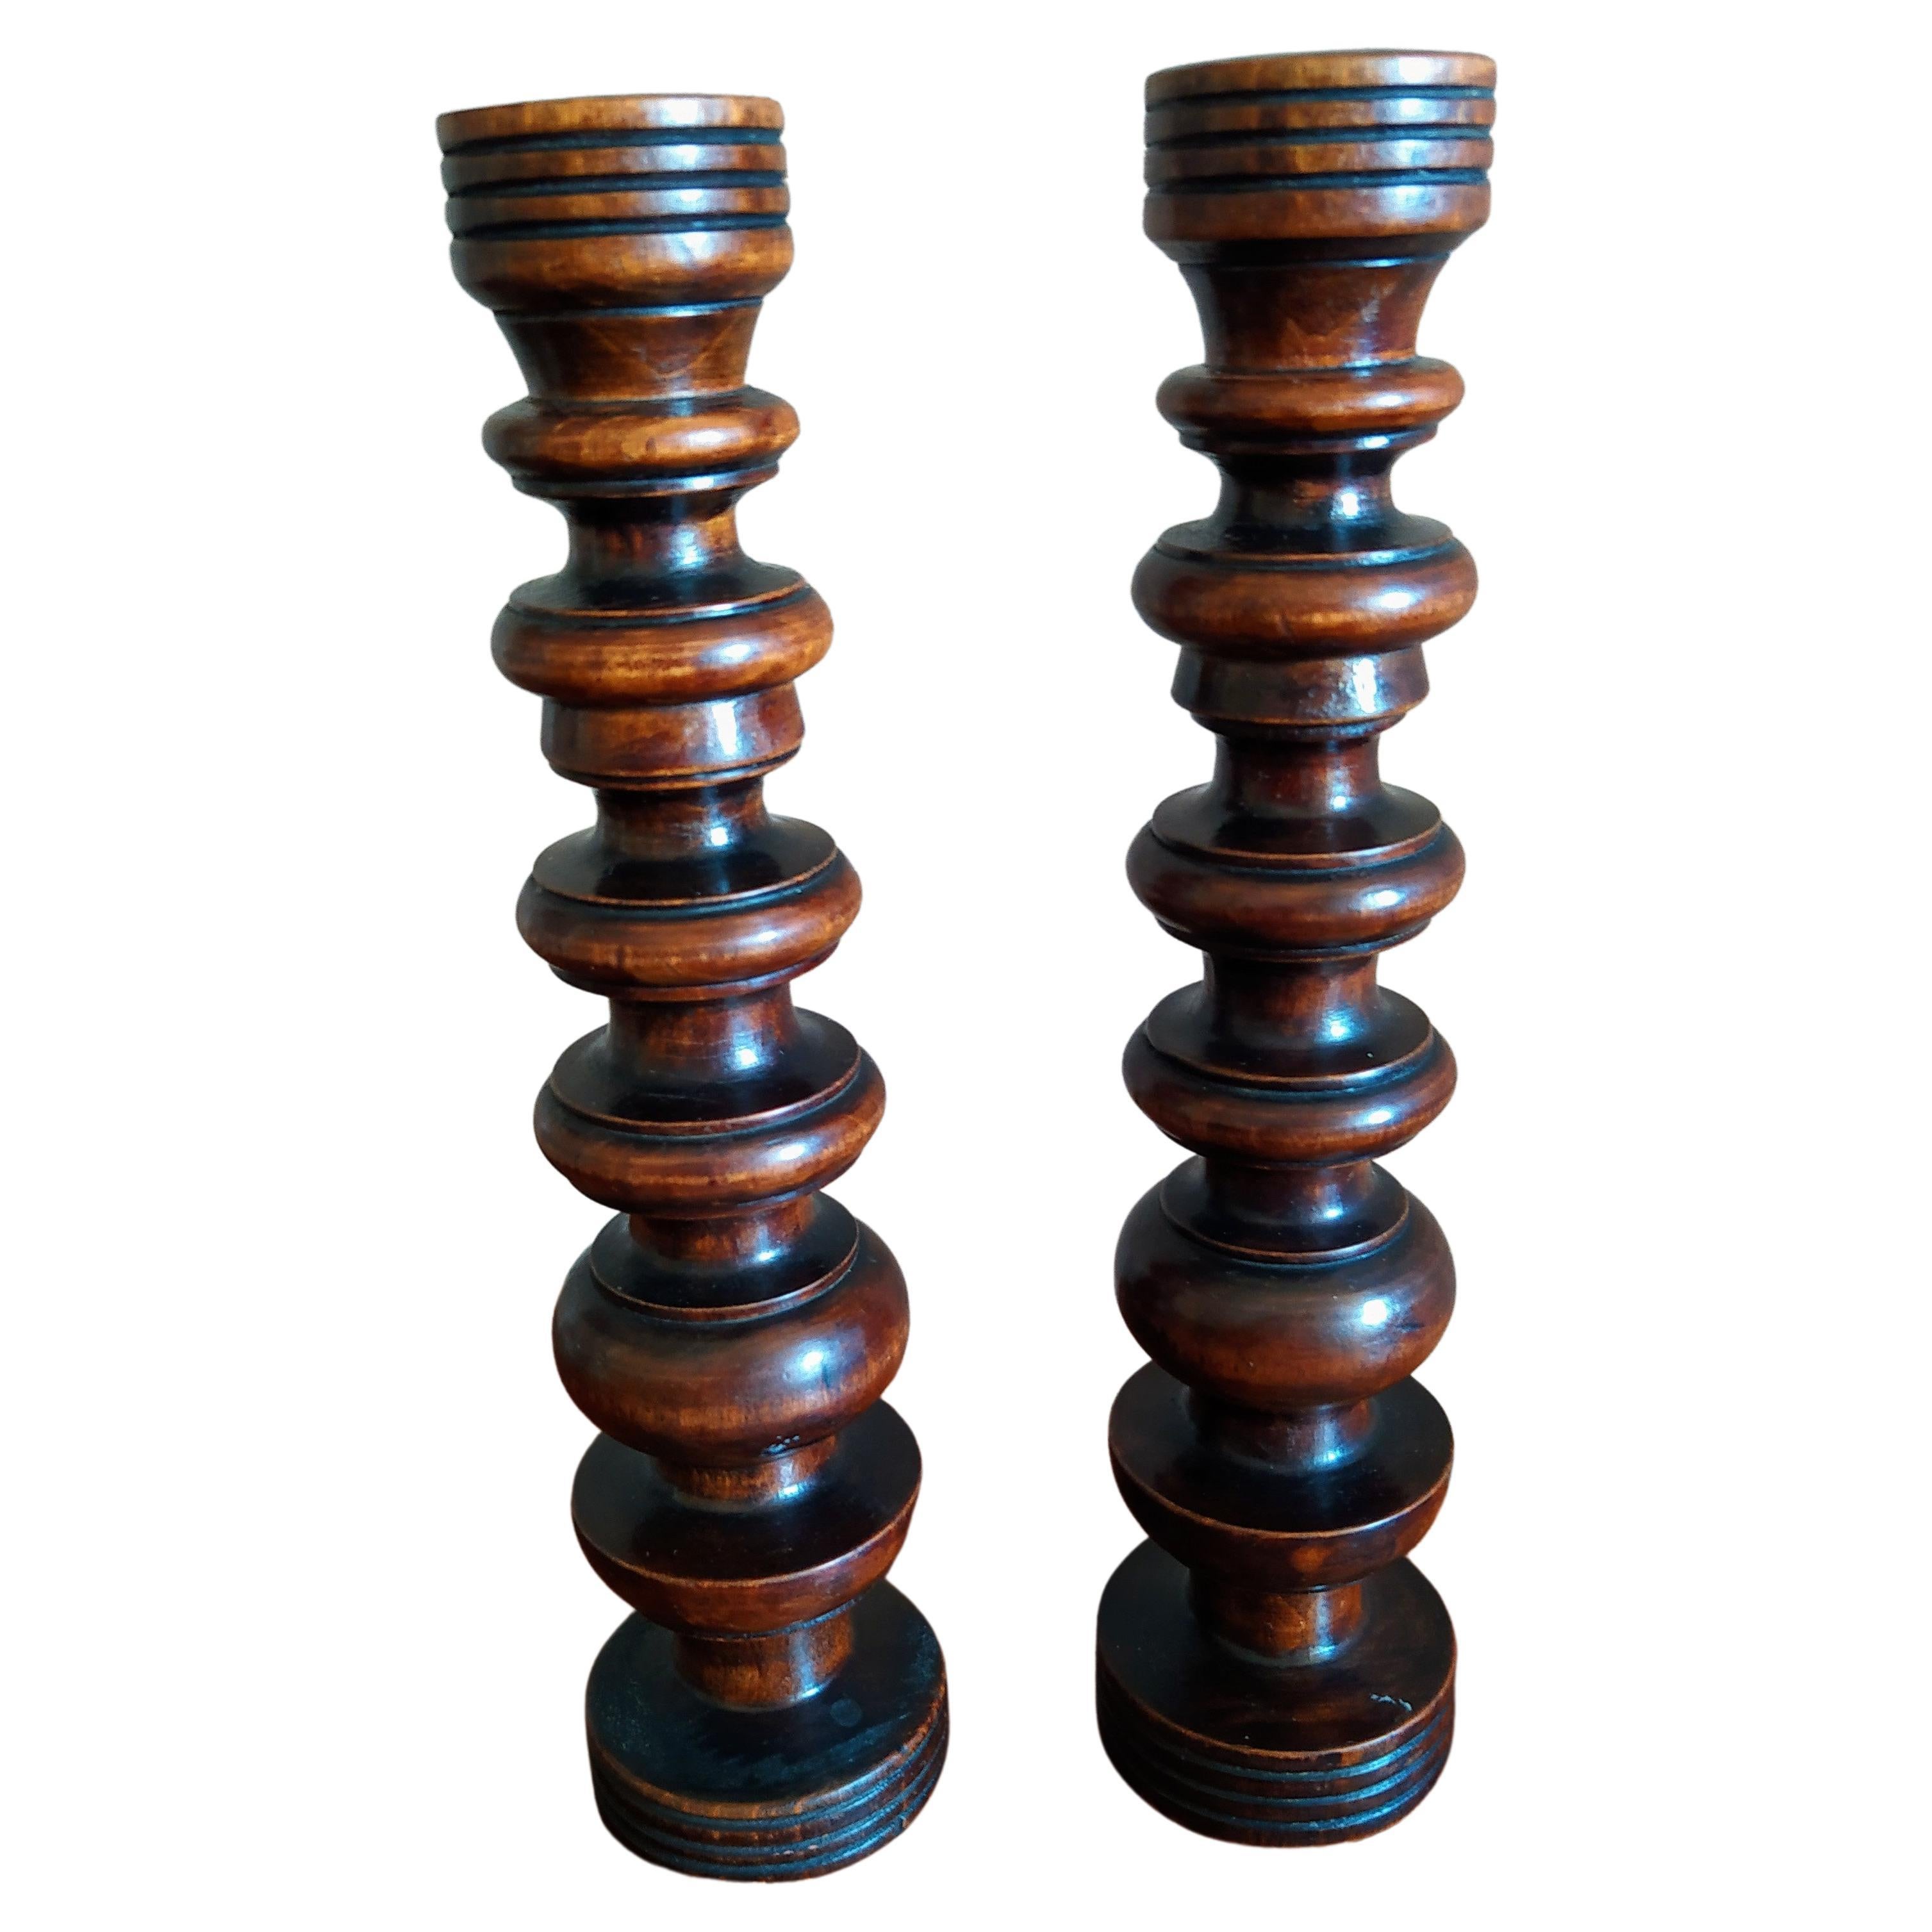 Pair of Early C20th French Turned Walnut Candlesticks